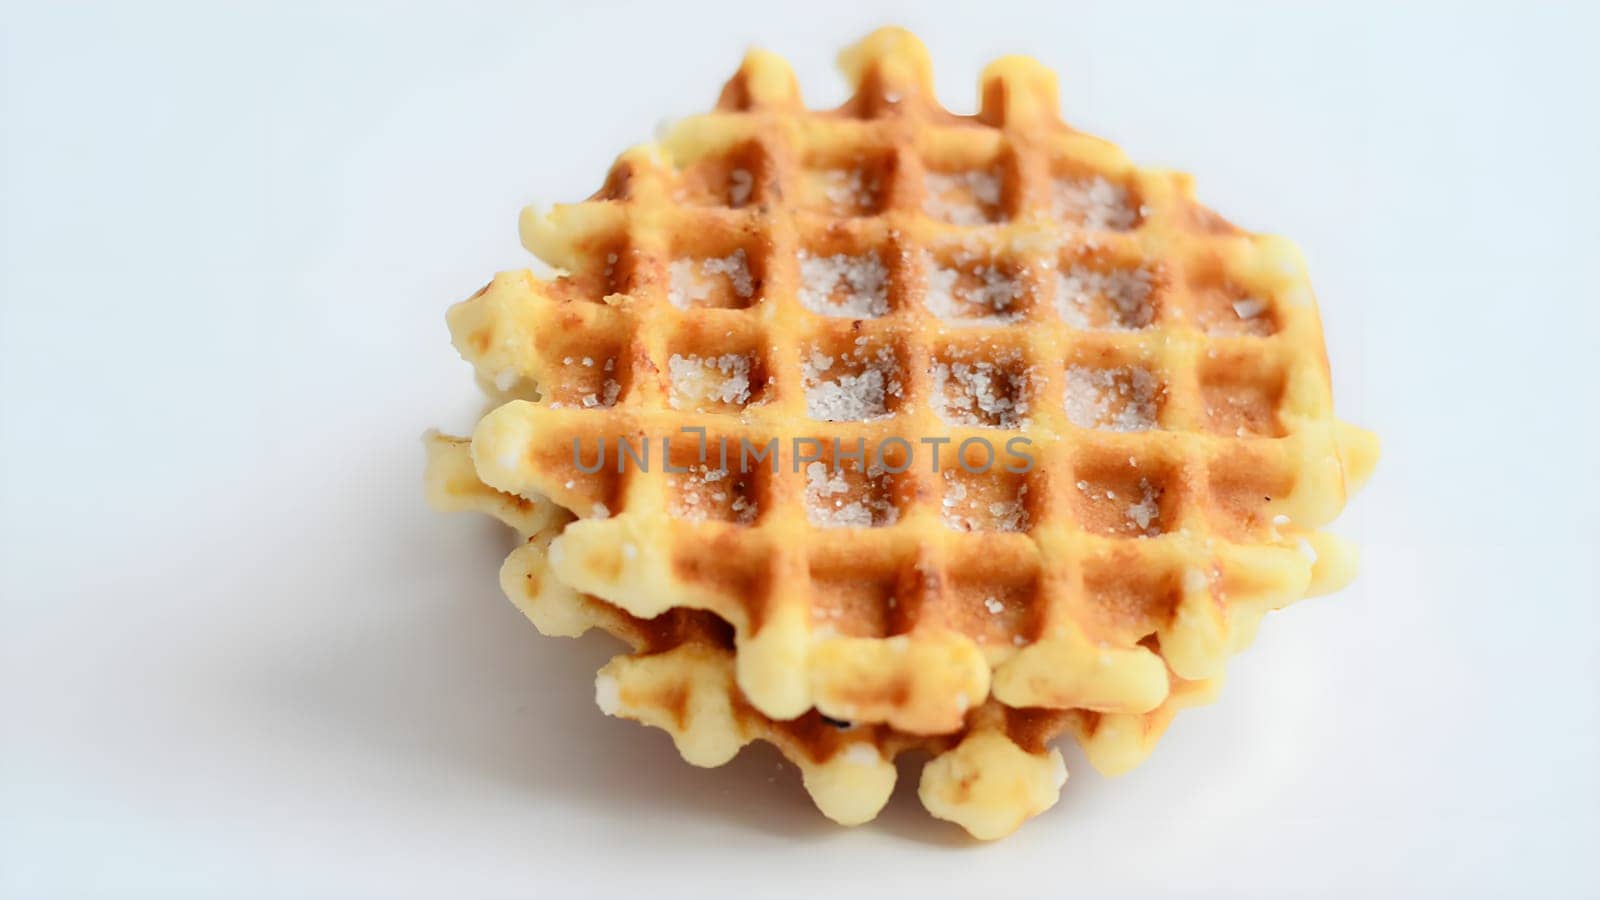 belgium sugar waffles on white background by andre_dechapelle